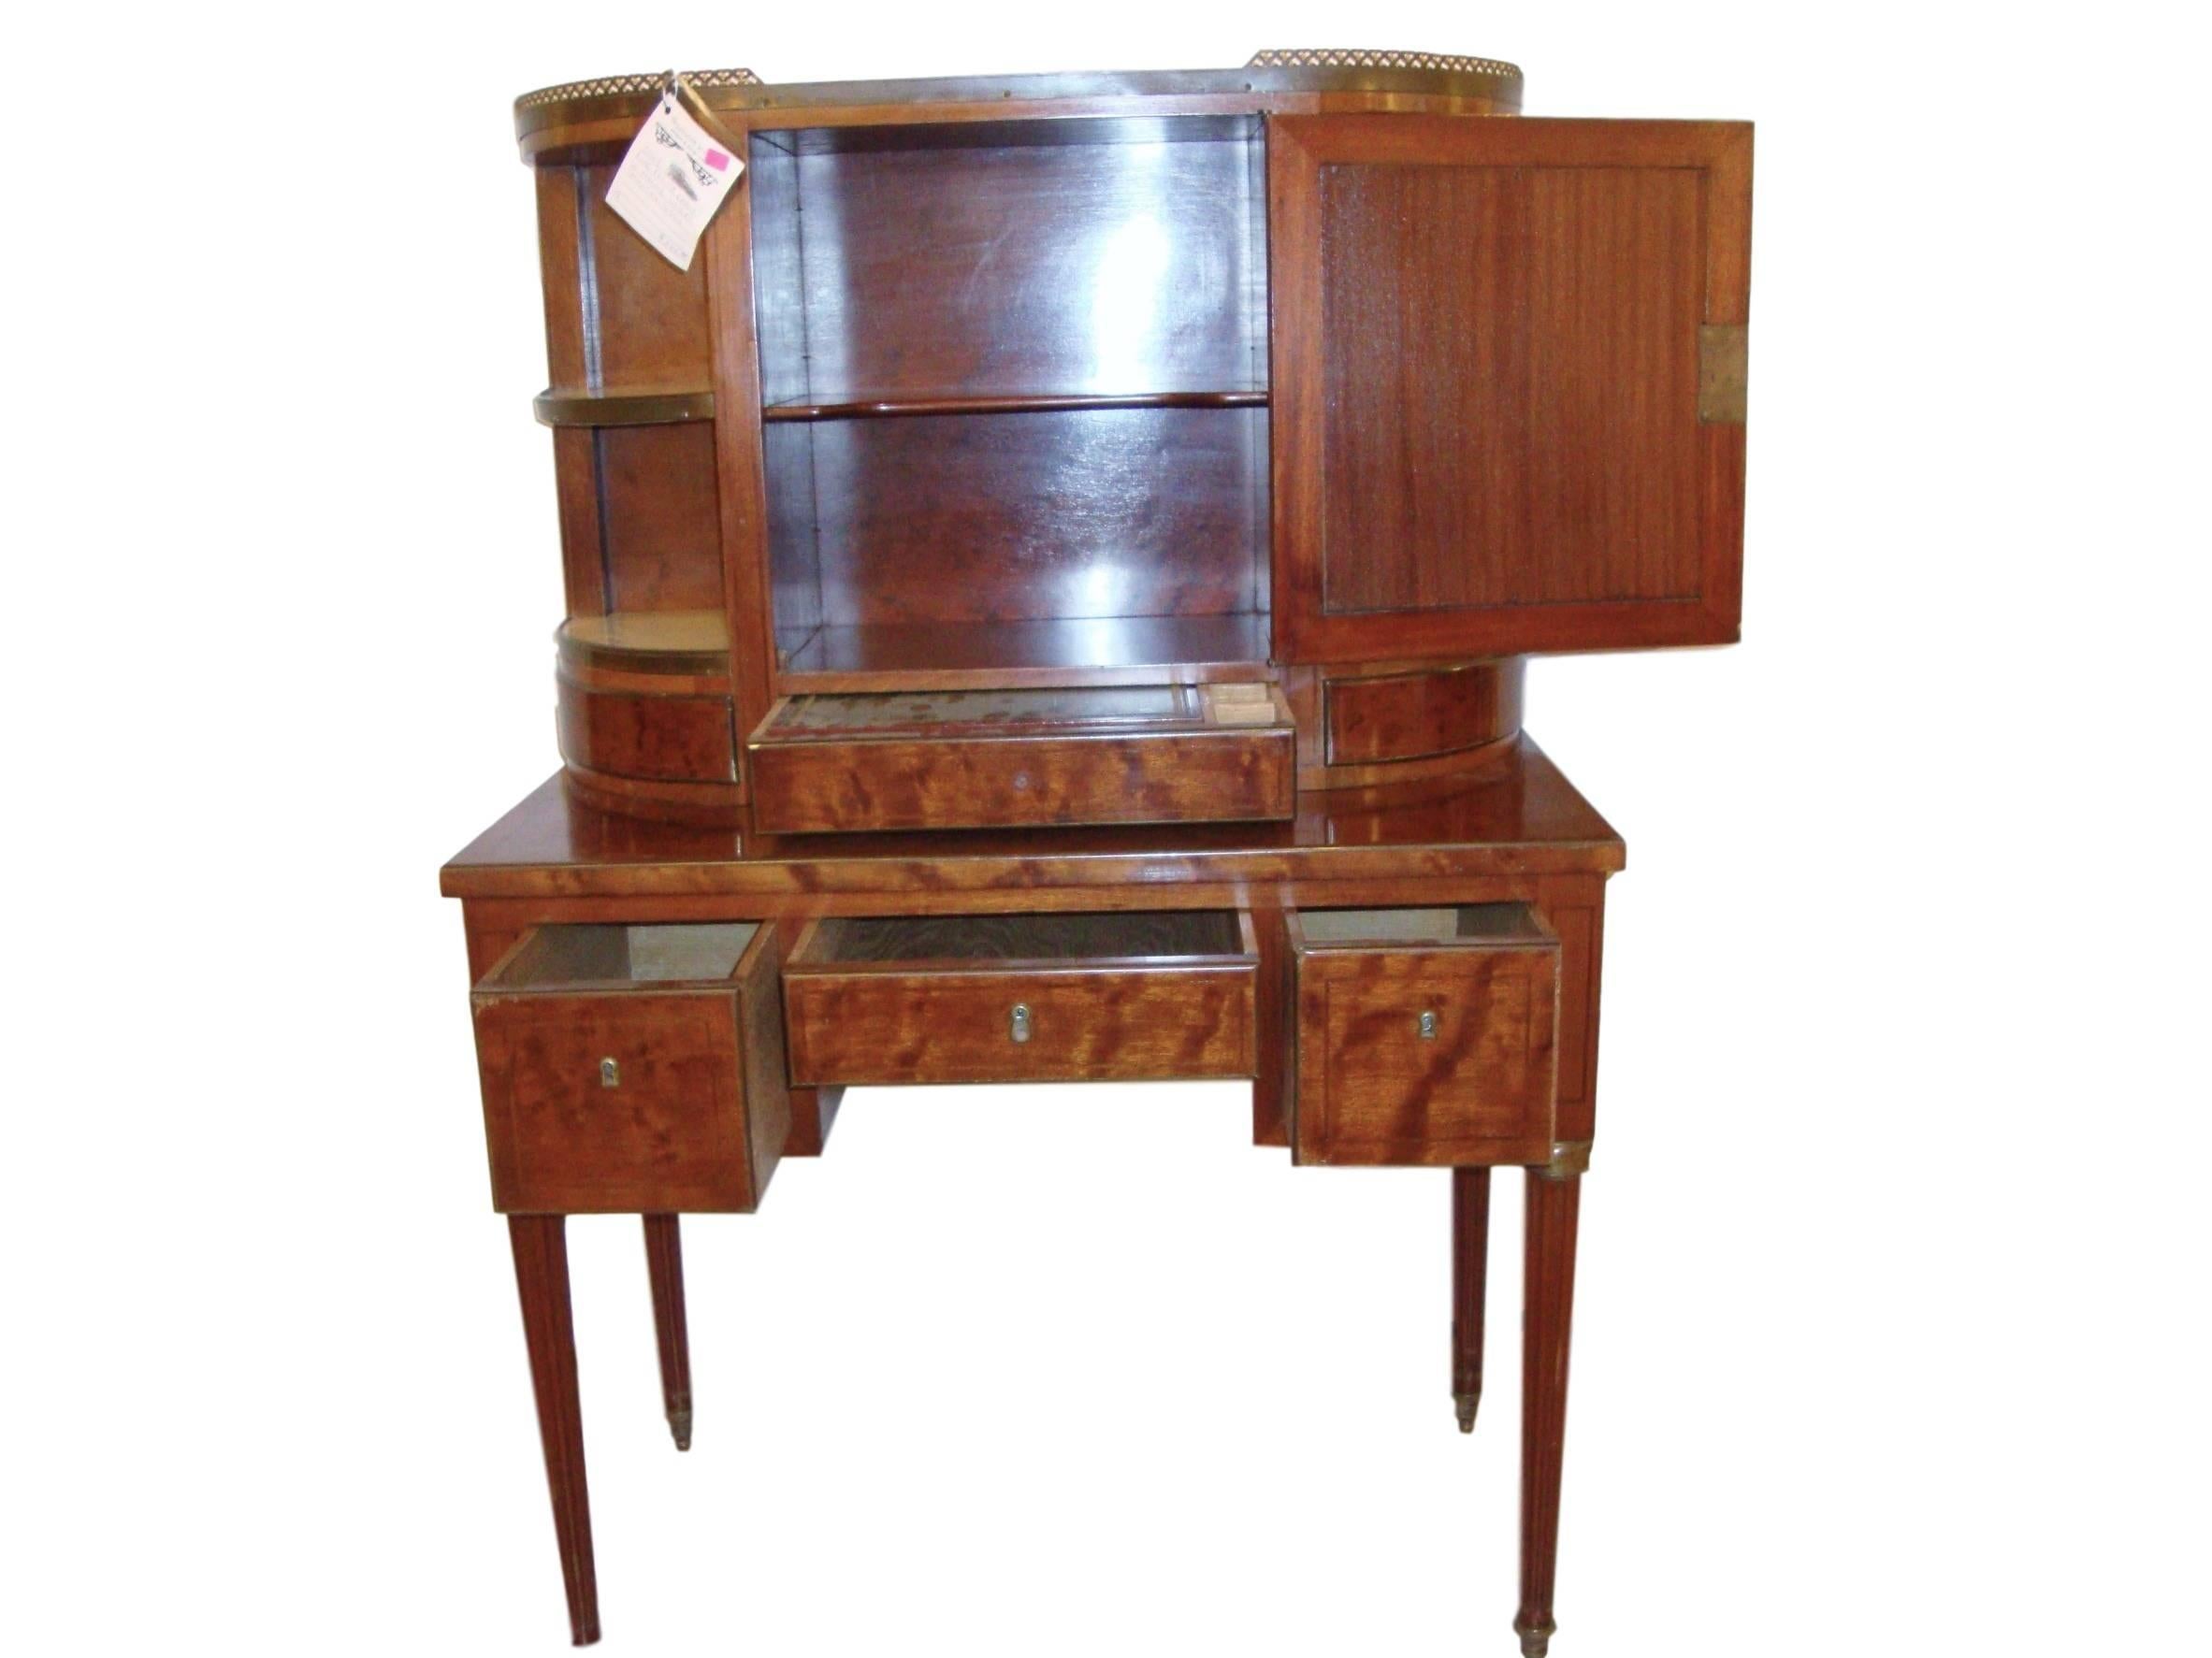 A Louis XVI style desk with vitrine Top. This fine custom quality Louis XVI style desk has long tapering bronze-mounted legs supporting a center drawer flanked by larger drawers leading to a set of three smaller drawers under a vitrine mirrored